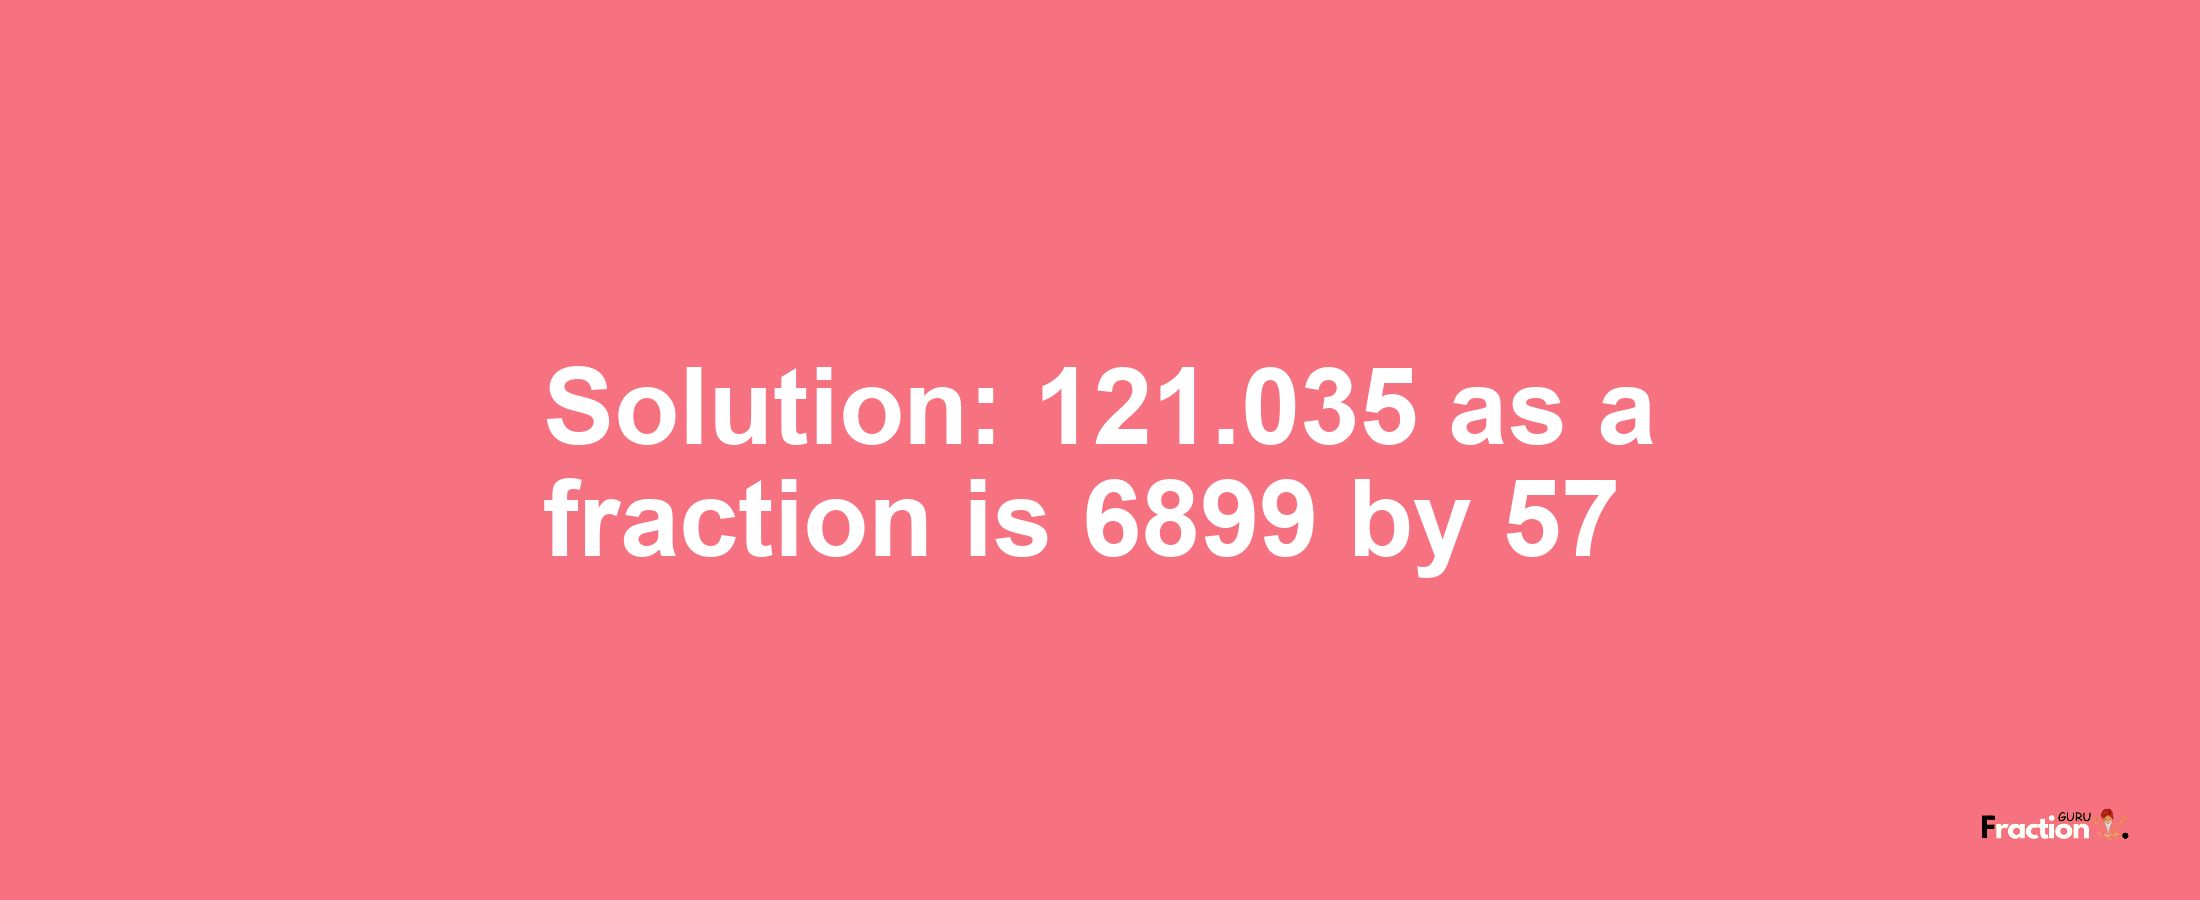 Solution:121.035 as a fraction is 6899/57